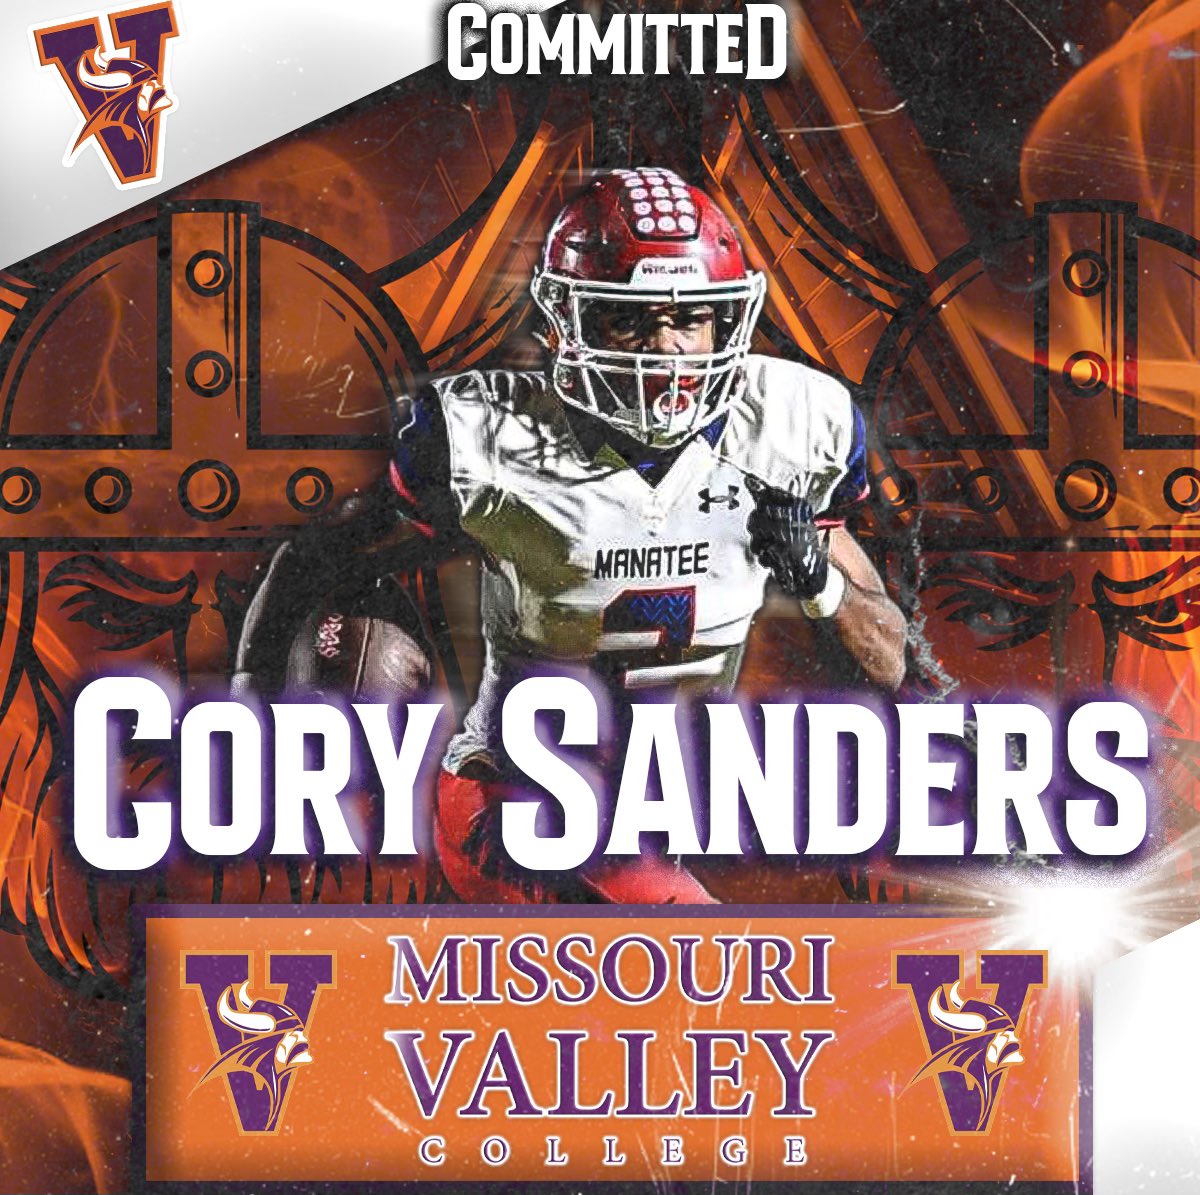 100% committed🧡💜!! @missourivalley @JacquezGreen @larryblustein @Dwight_XOS @RyanWrightRNG @H2_Recruiting @Andy_Villamarzo